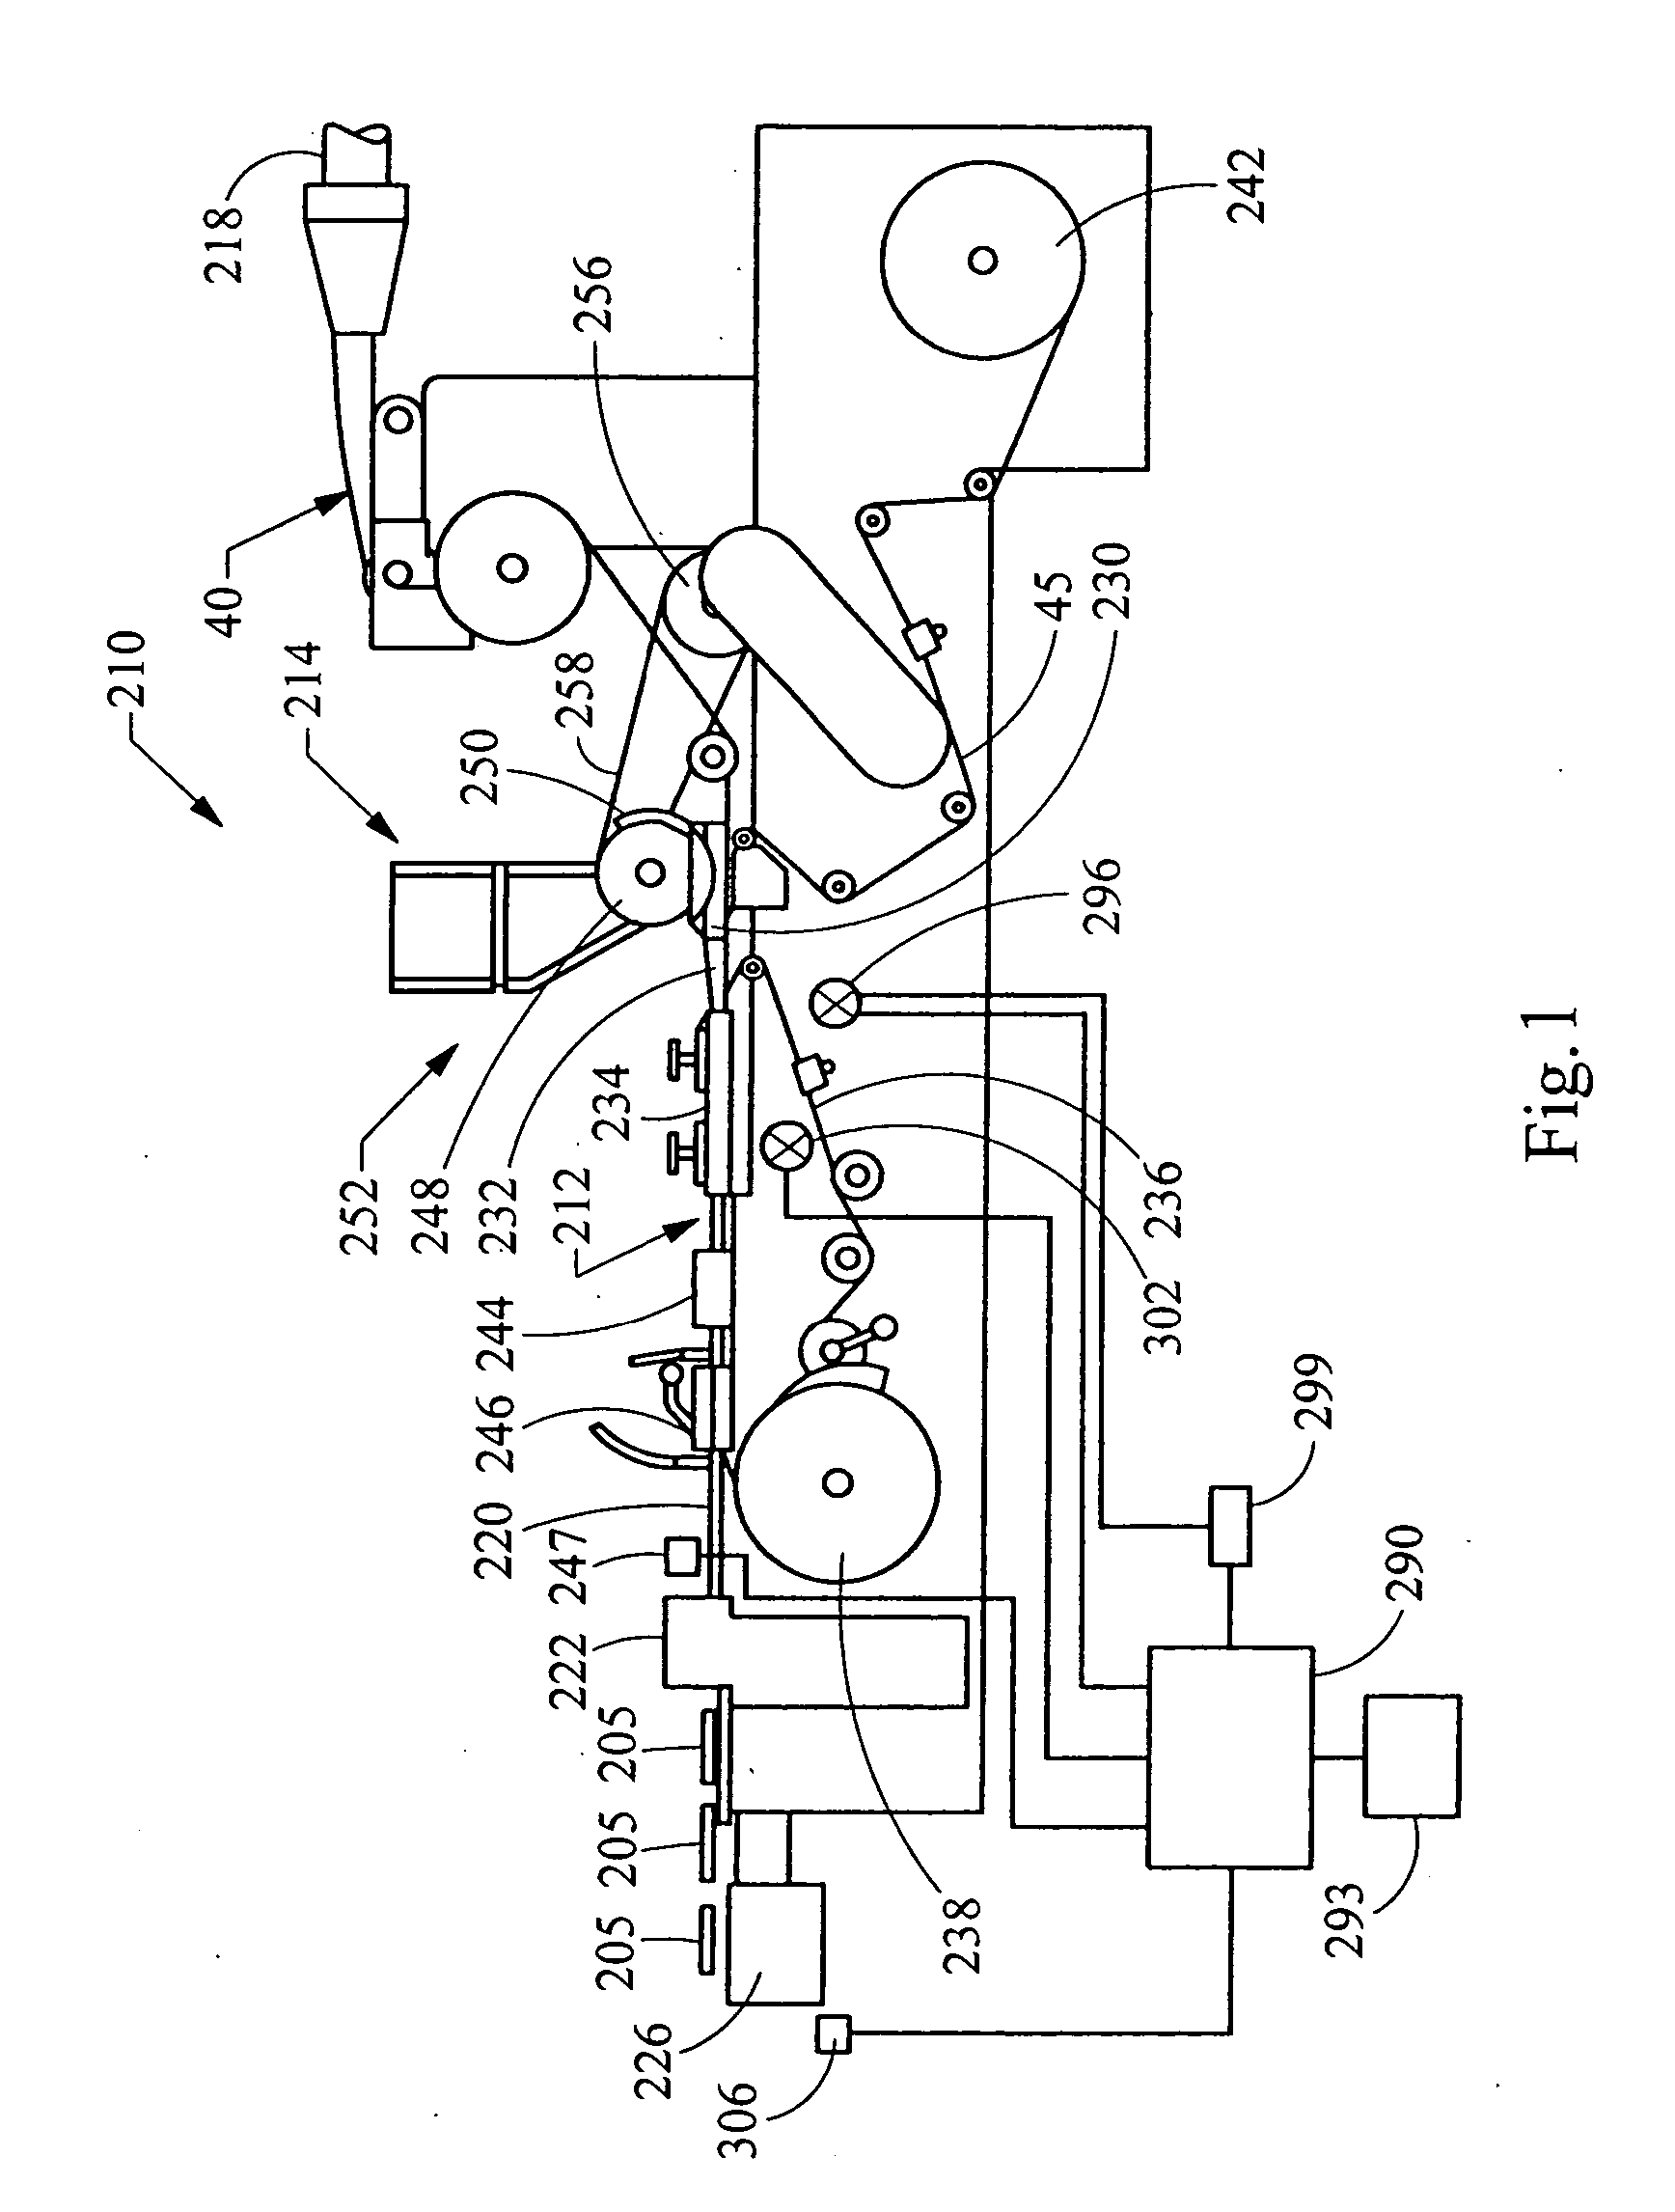 Equipment for insertion of objects into smoking articles